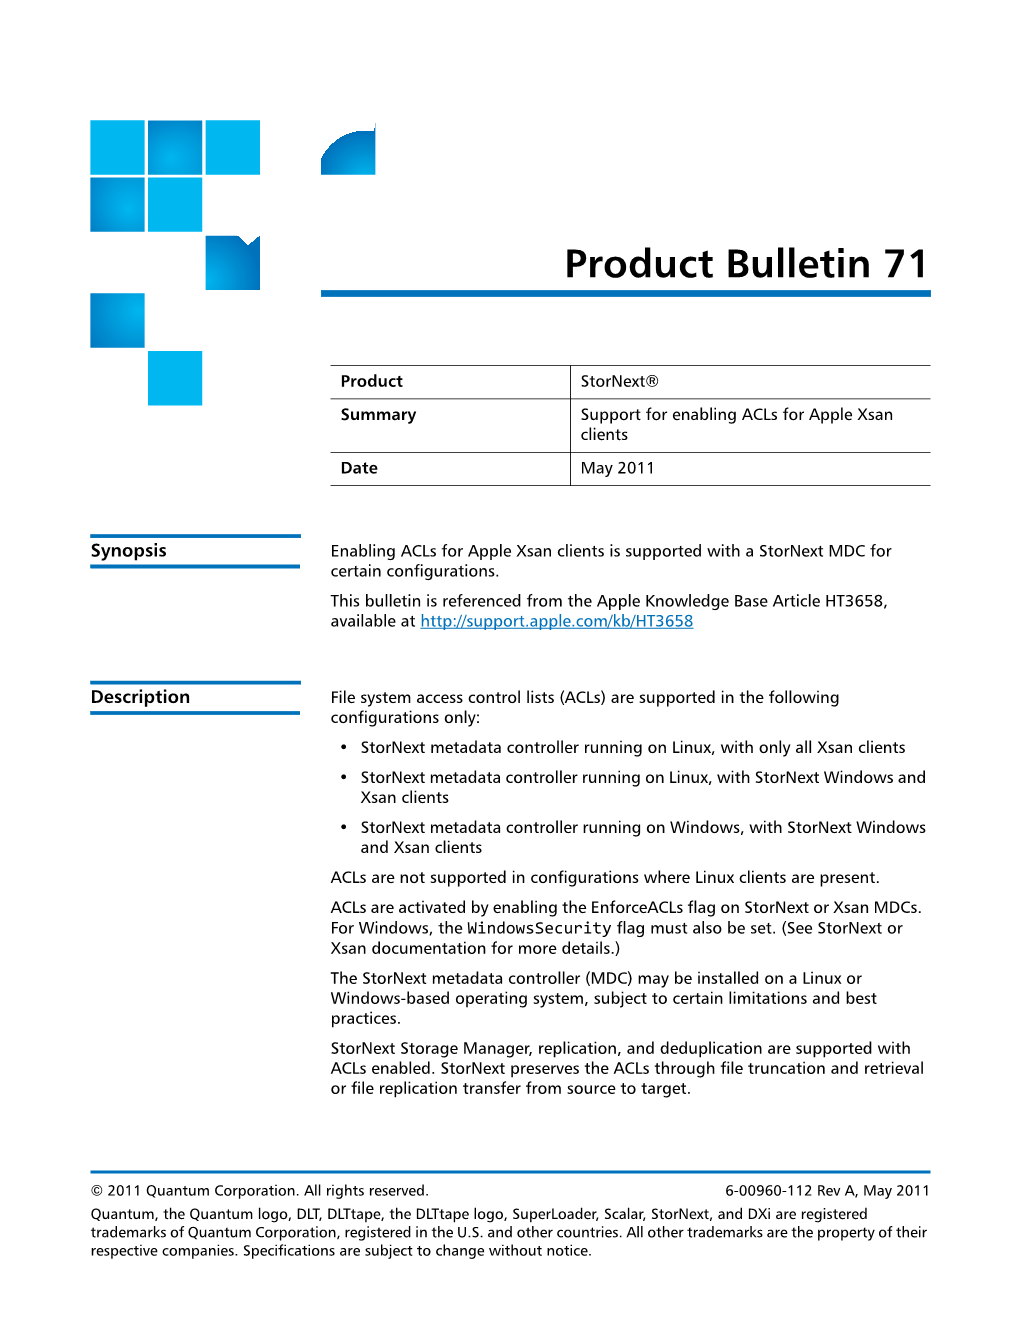 Stornext Product Bulletin 71 6-00960-112 Rev a May 2011